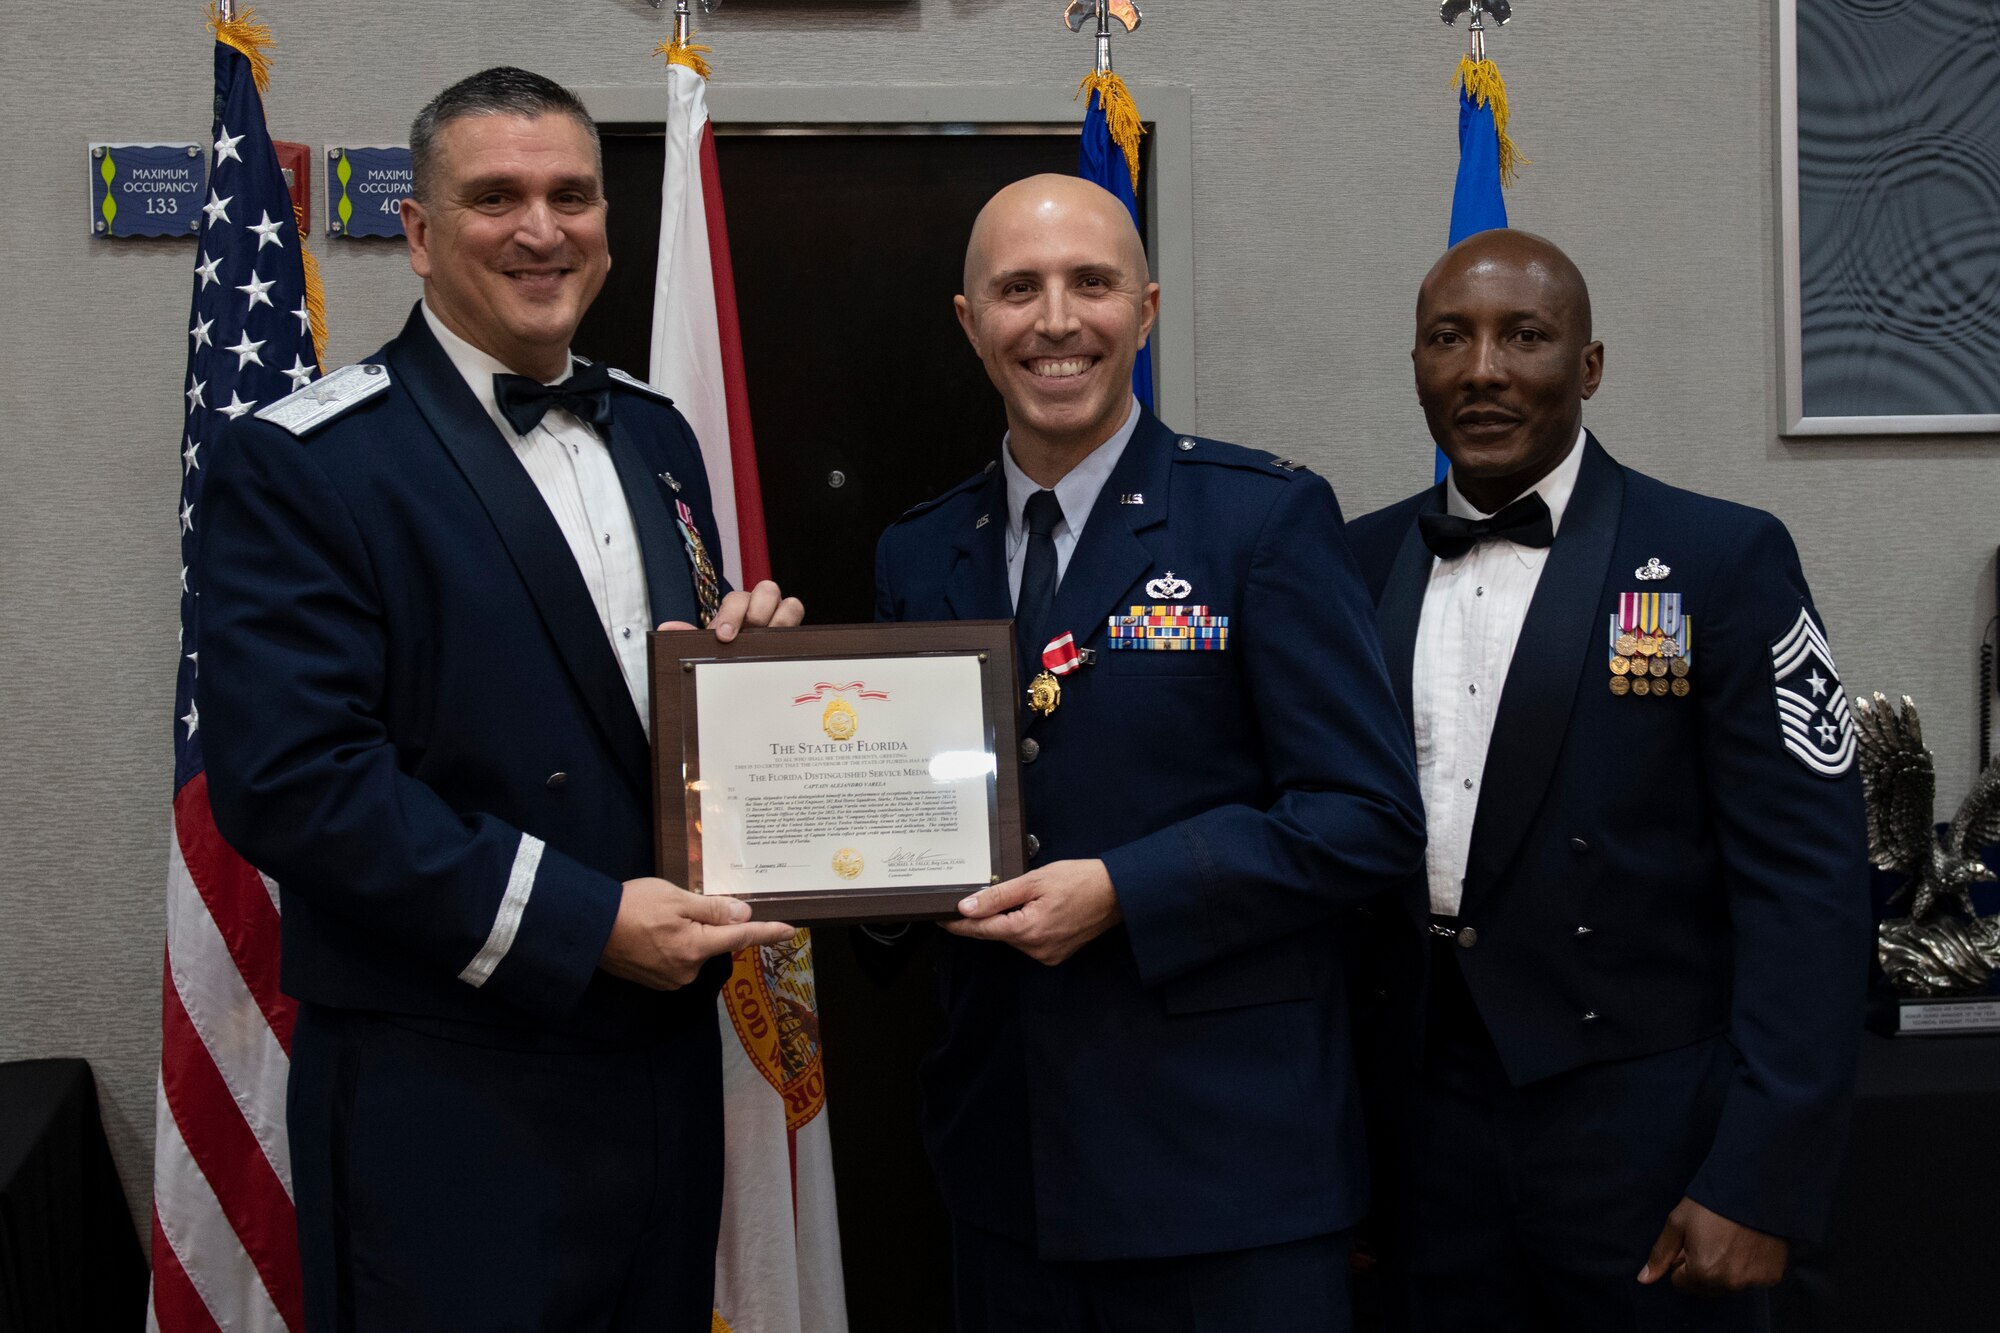 U.S. Air Force Capt. Alejandro Varela receives the Florida Distinguished Service Medal at the Florida Air National Guard's Airman of the Year banquet held in Jacksonville, Fla. on January 8, 2022. Varela holds the title of Airman of the Year for the Company Grade Officer category this year. The Airman of the Year award program is designed to recognize Airmen who display superior leadership, job performance and personal achievement during the prior calendar year. (U.S. Air National Guard photo by Senior Airman Jacob Hancock)